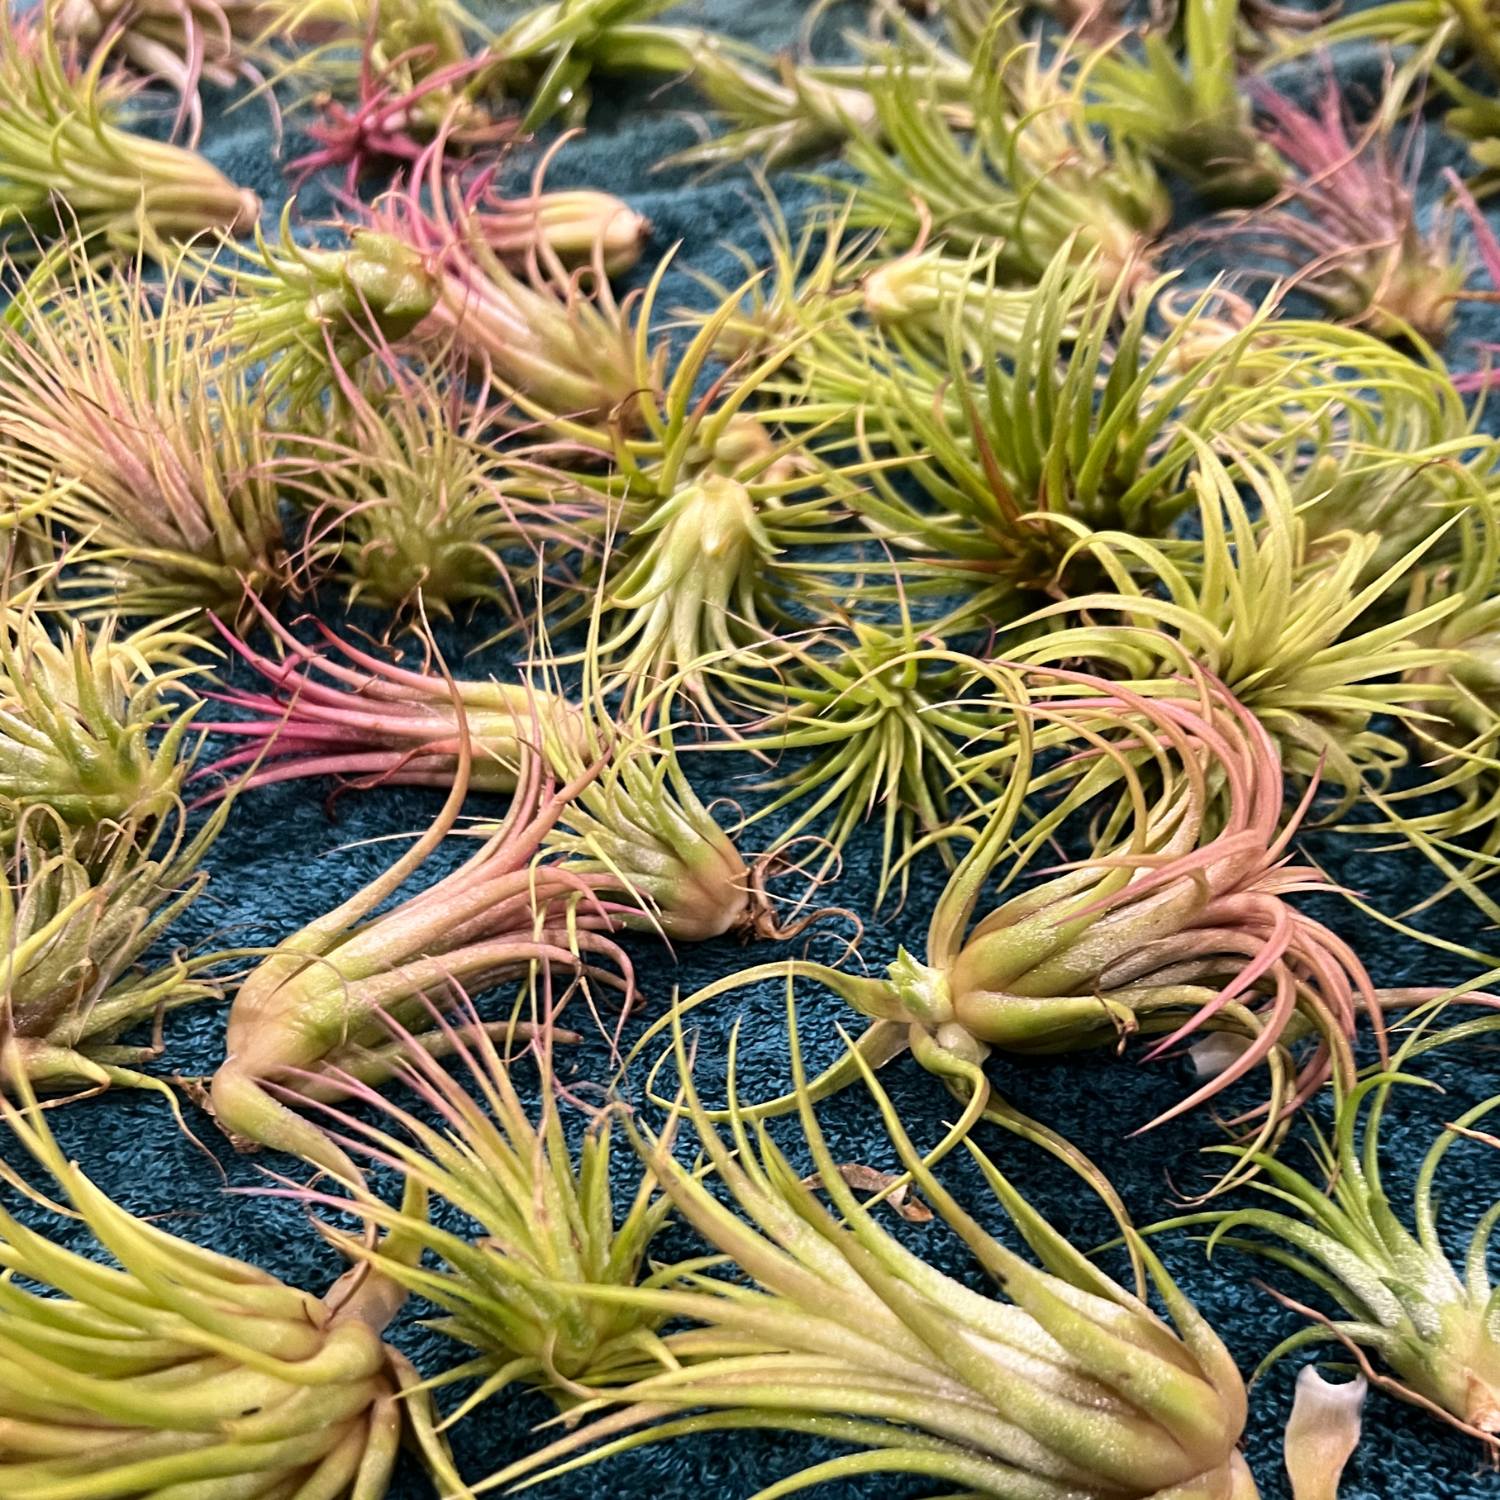 Airplants being dried after watering